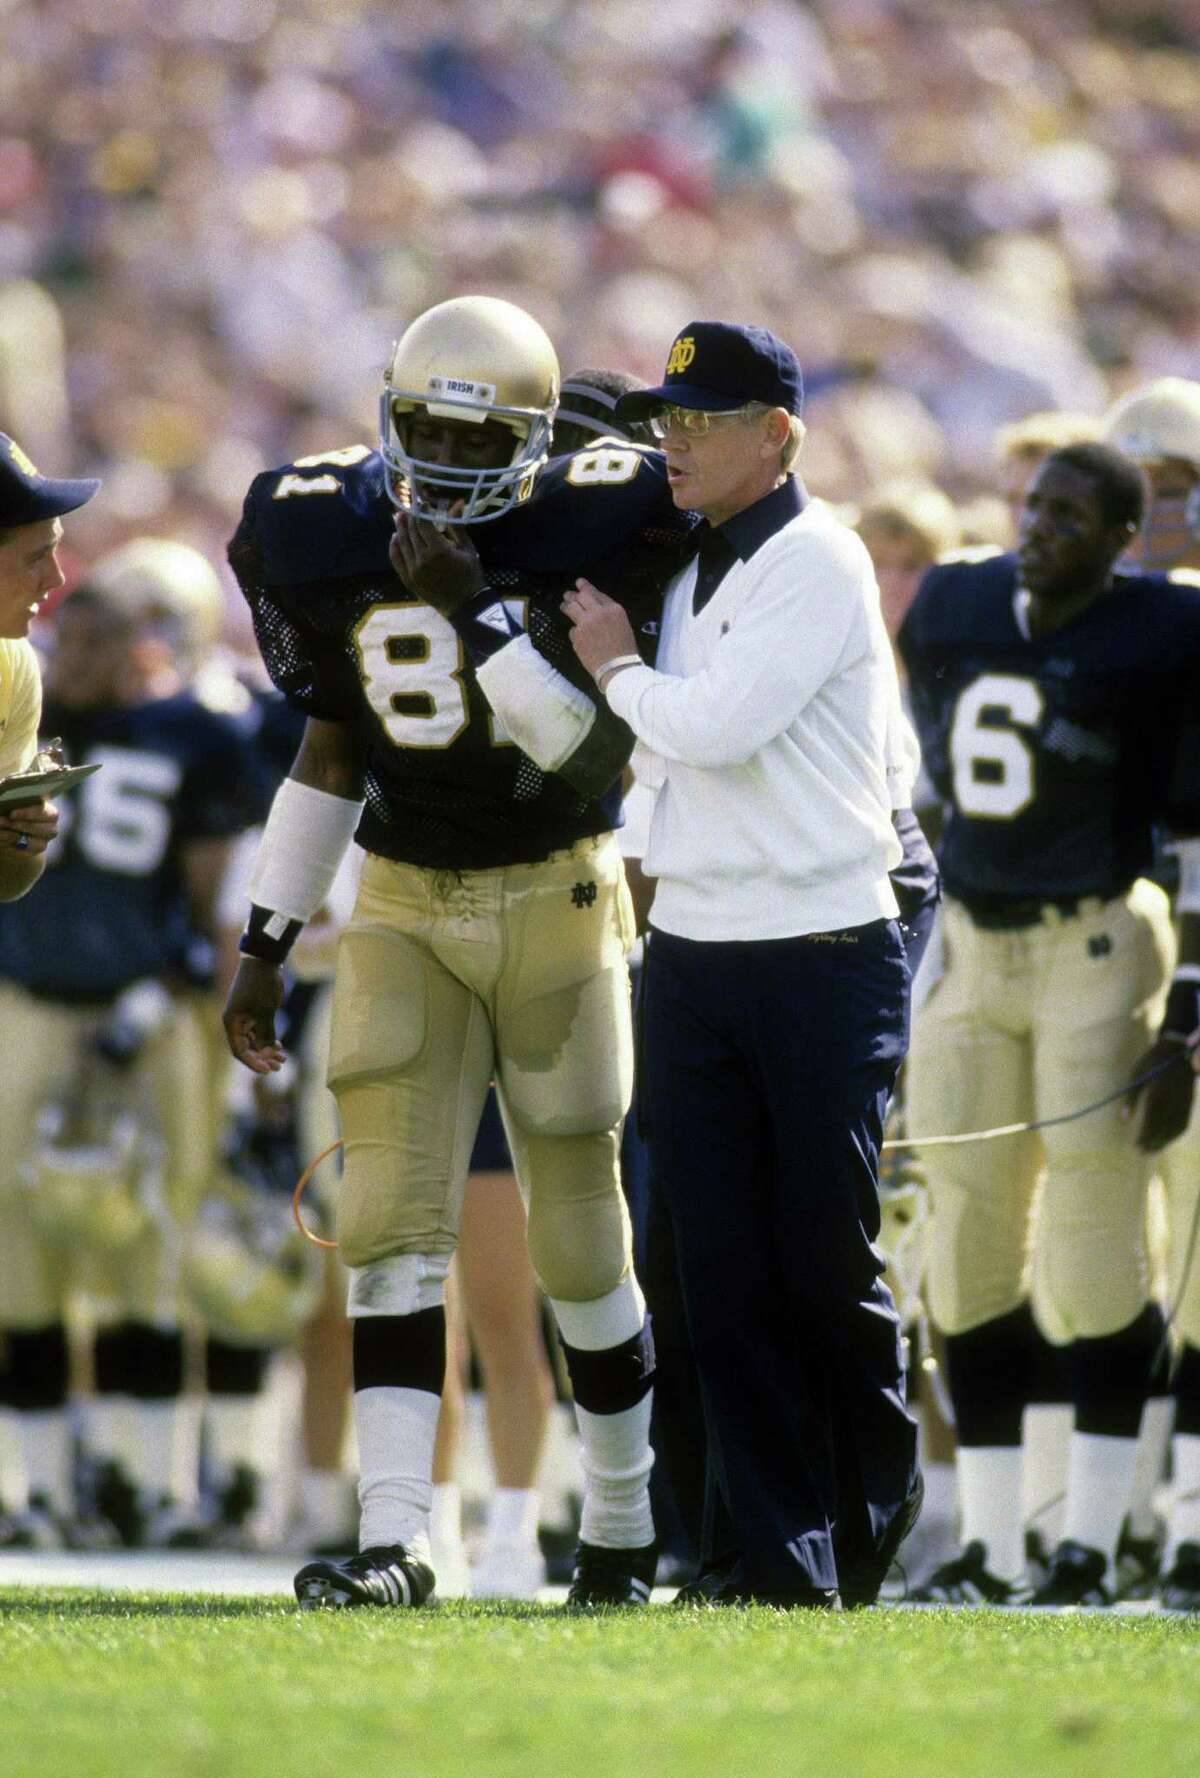 Head Coach Lou Holtz of the Notre Dame Fighting Irish (r) sends in a play with wide receiver Tim Brown #81 during an NCAA football game against the University of Michigan September 10, 1988 at Notre Dame Stadium in South Bend, Indiana. Holtz coached the Notre Dame Fighting Irish from 1986-1996.